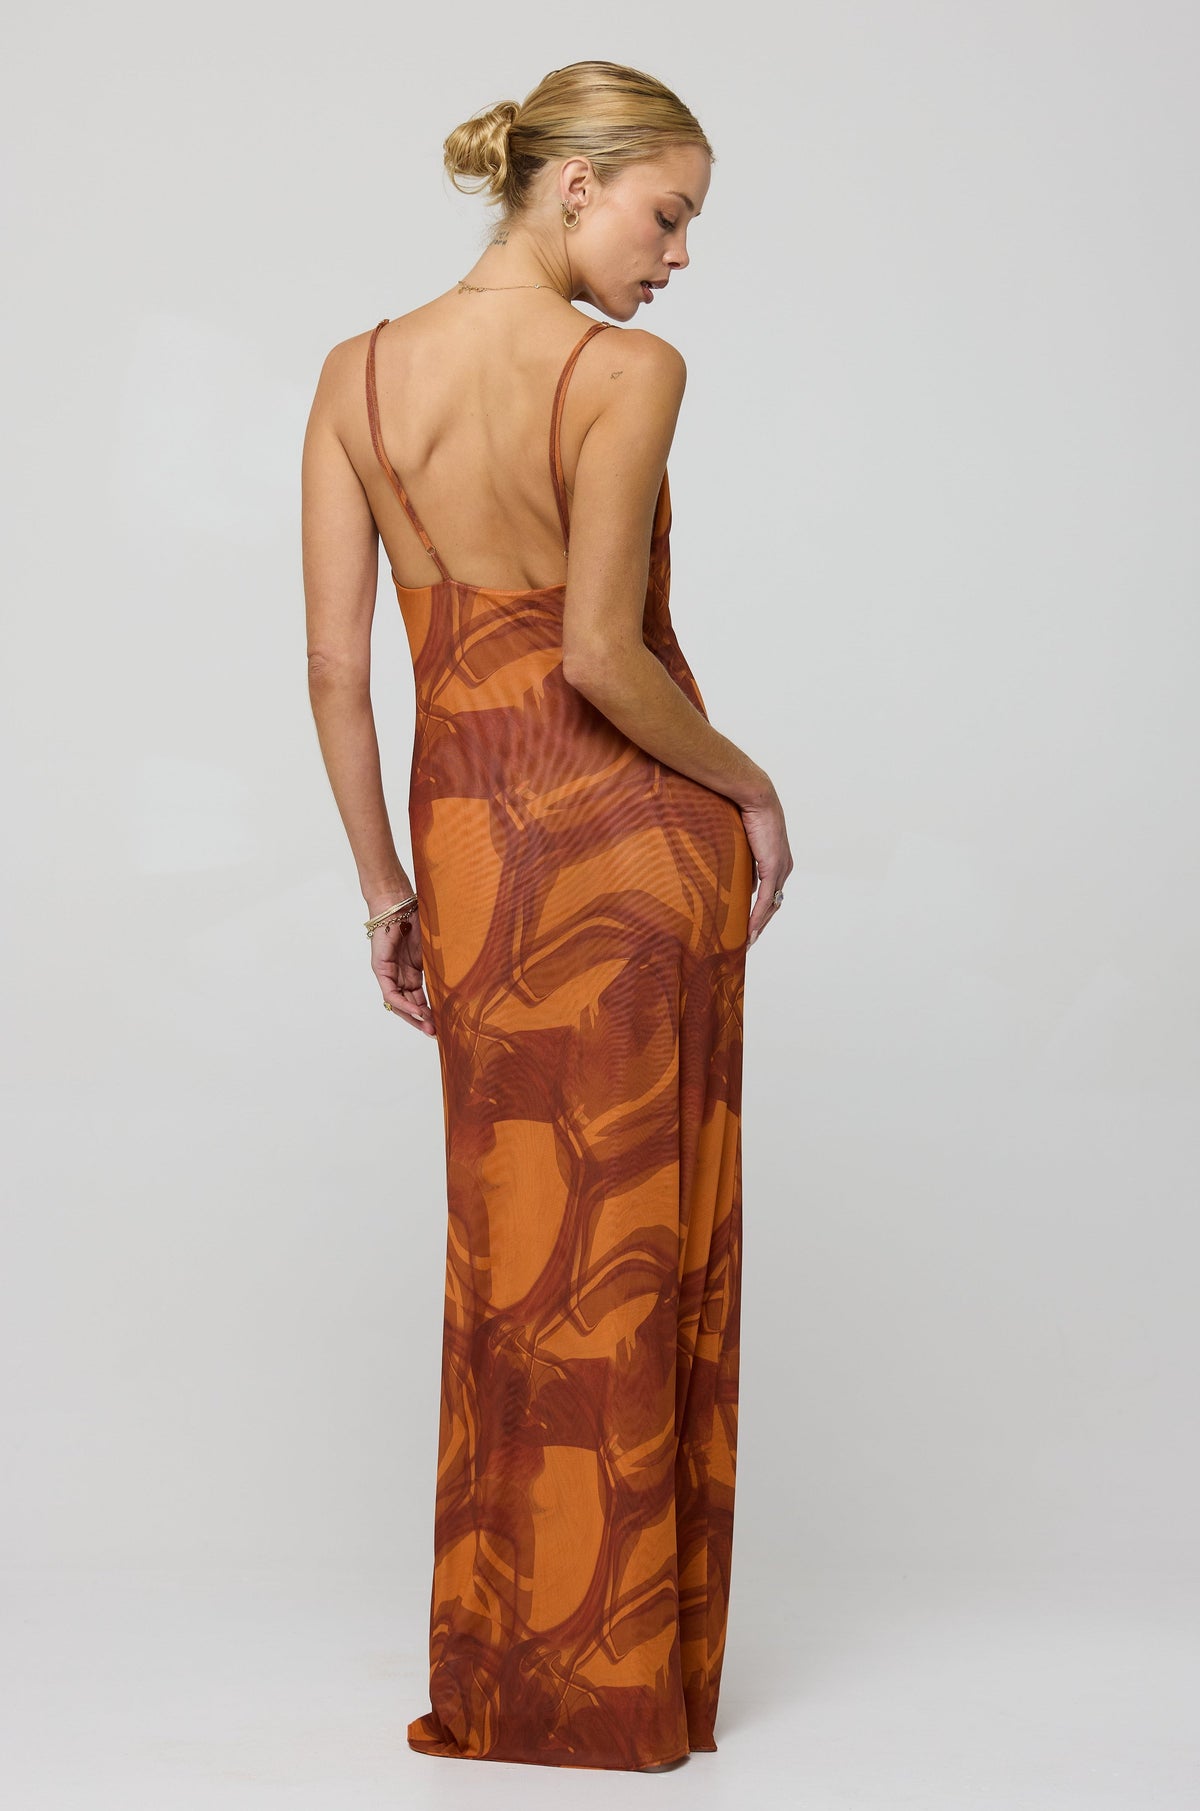 This is an image of Margot Mesh Maxi in Flame - RESA featuring a model wearing the dress